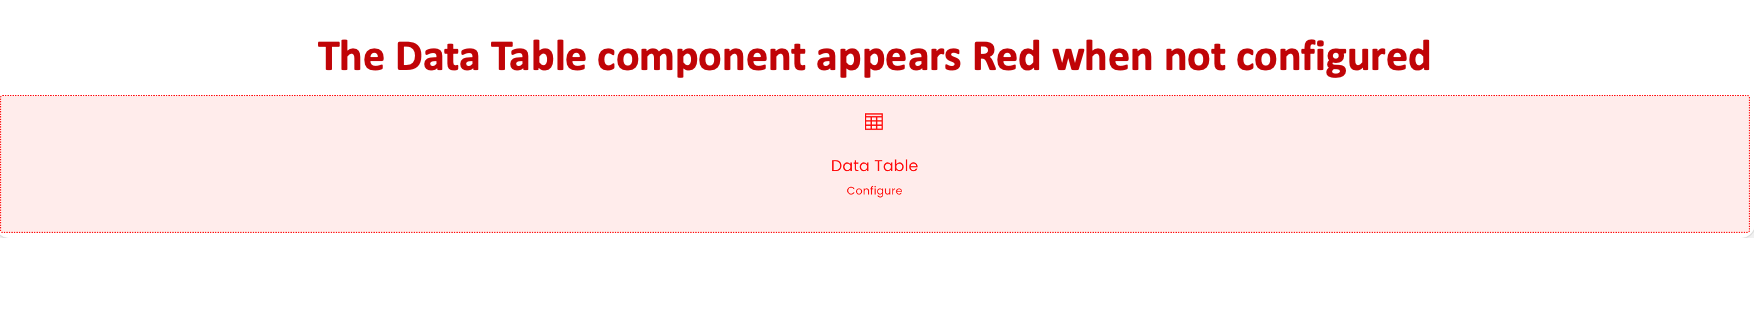 Data table in unconfigured state